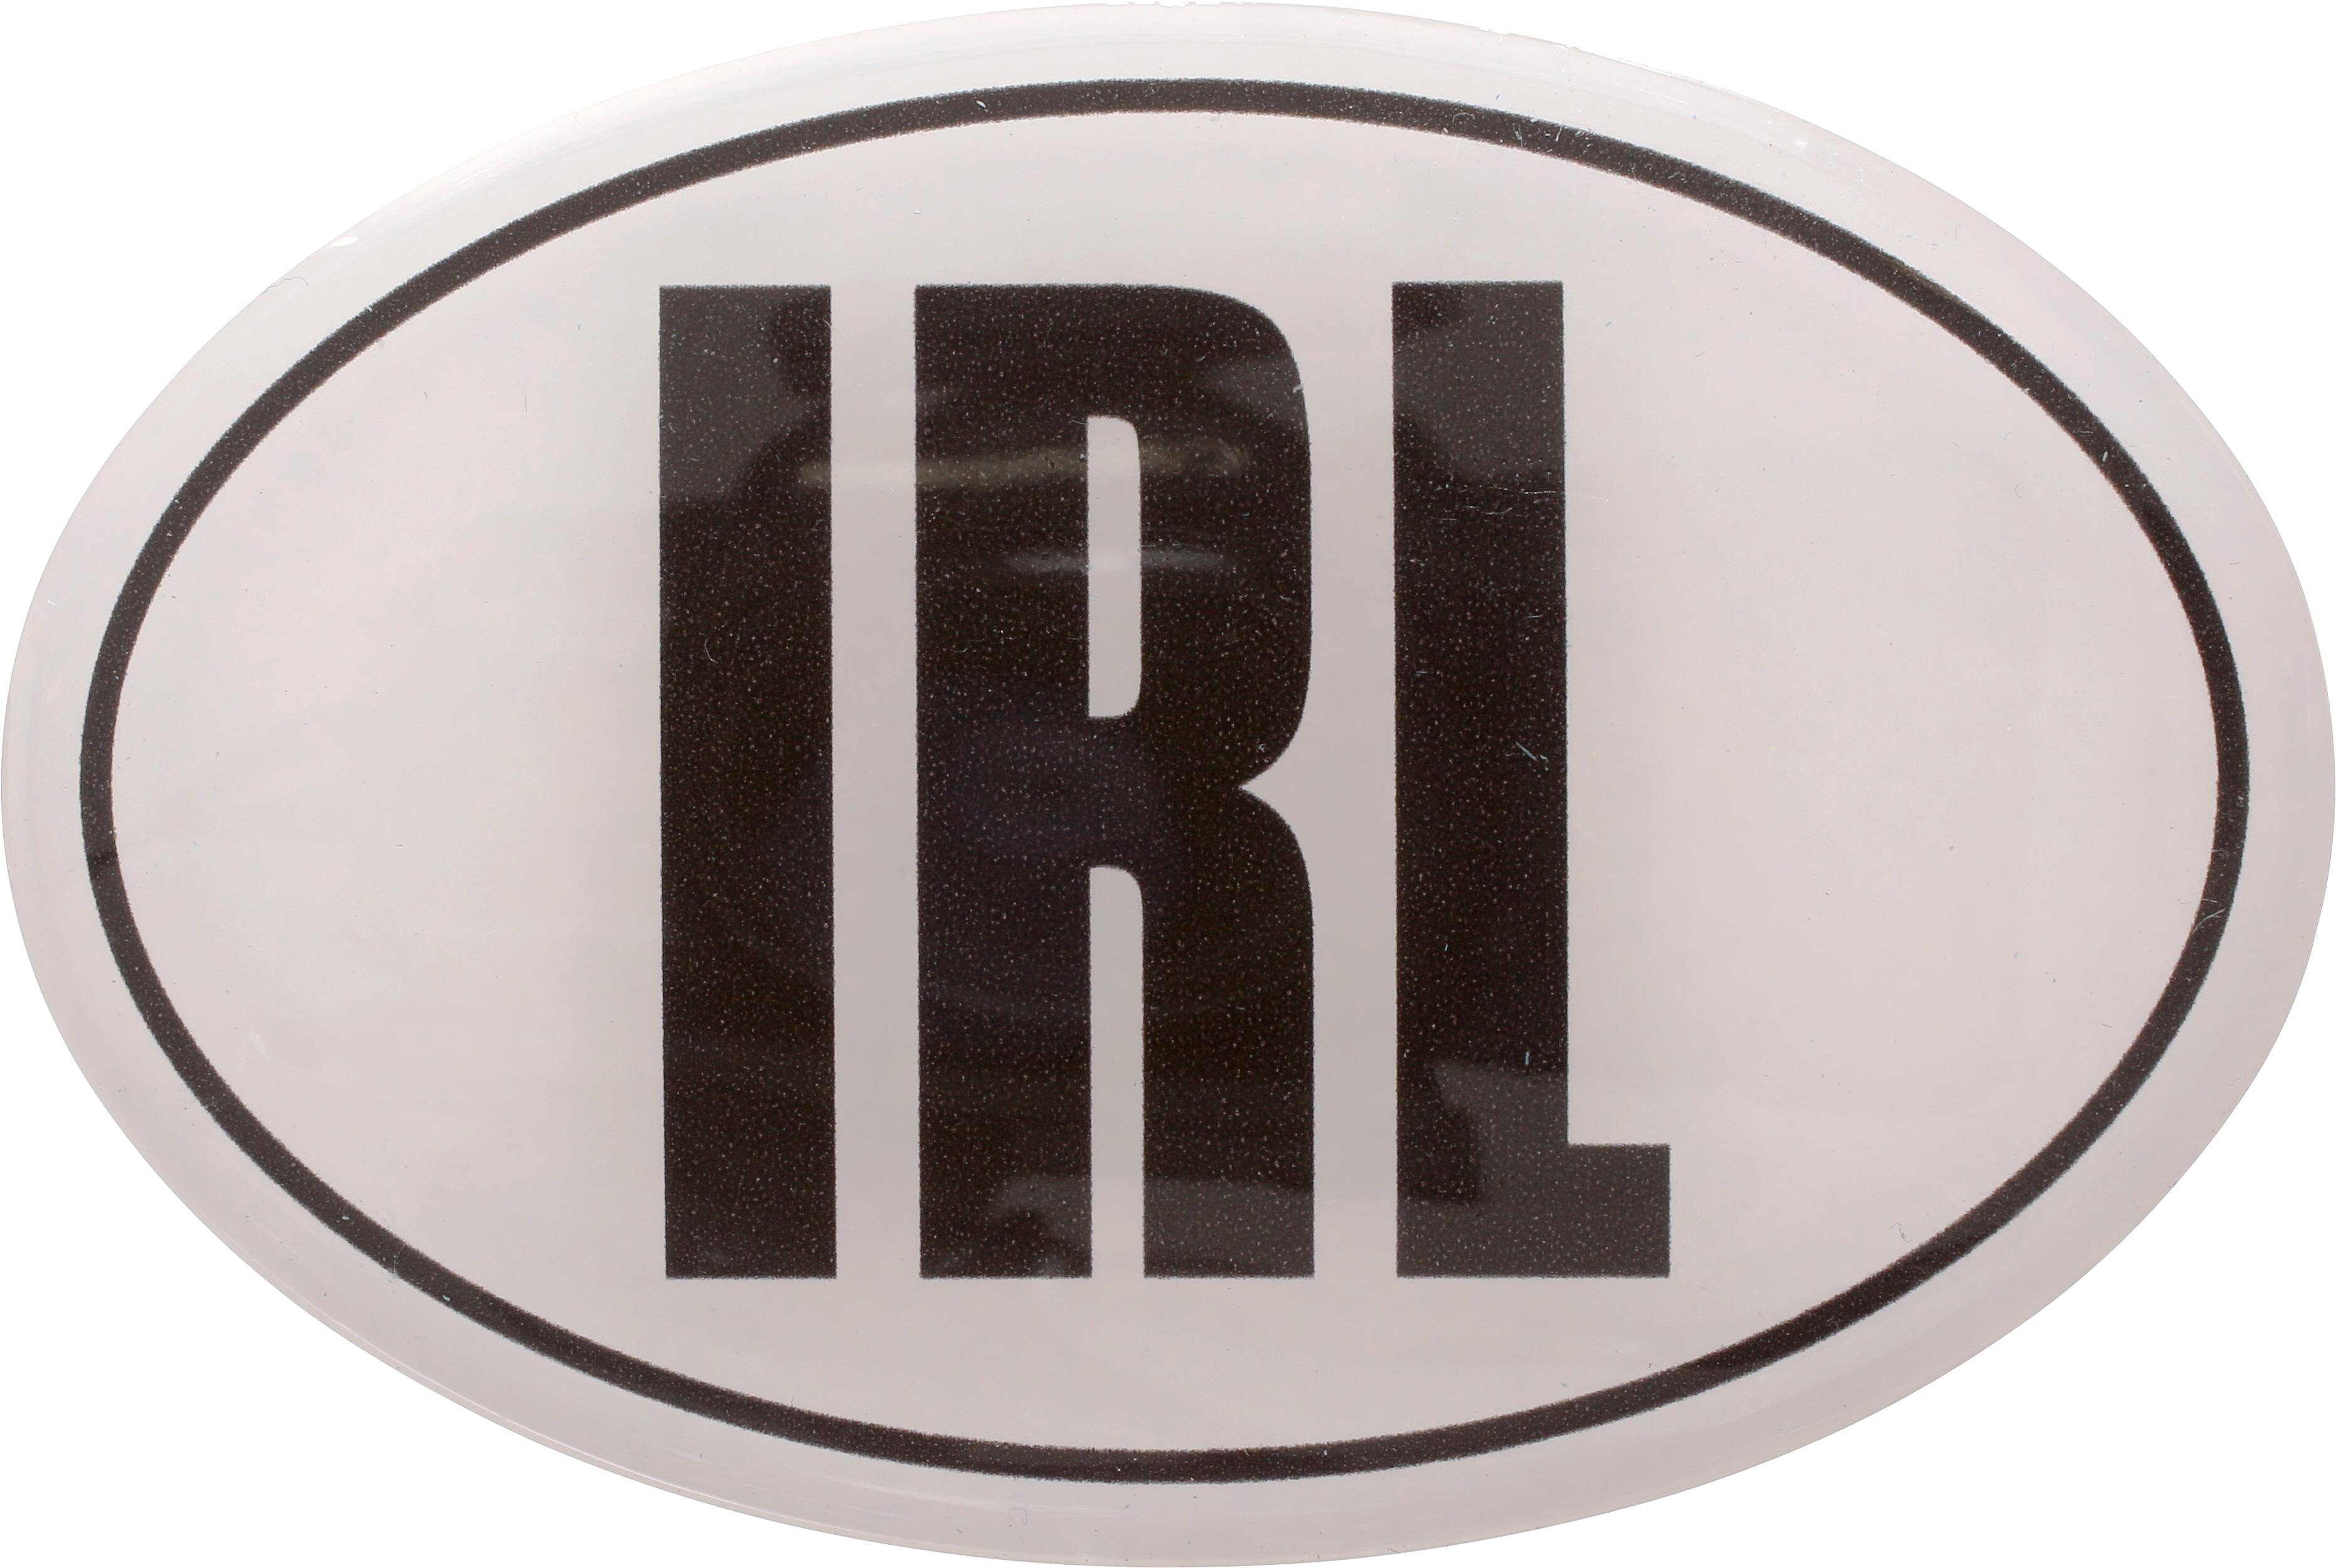 Irl Oval Resin Badge